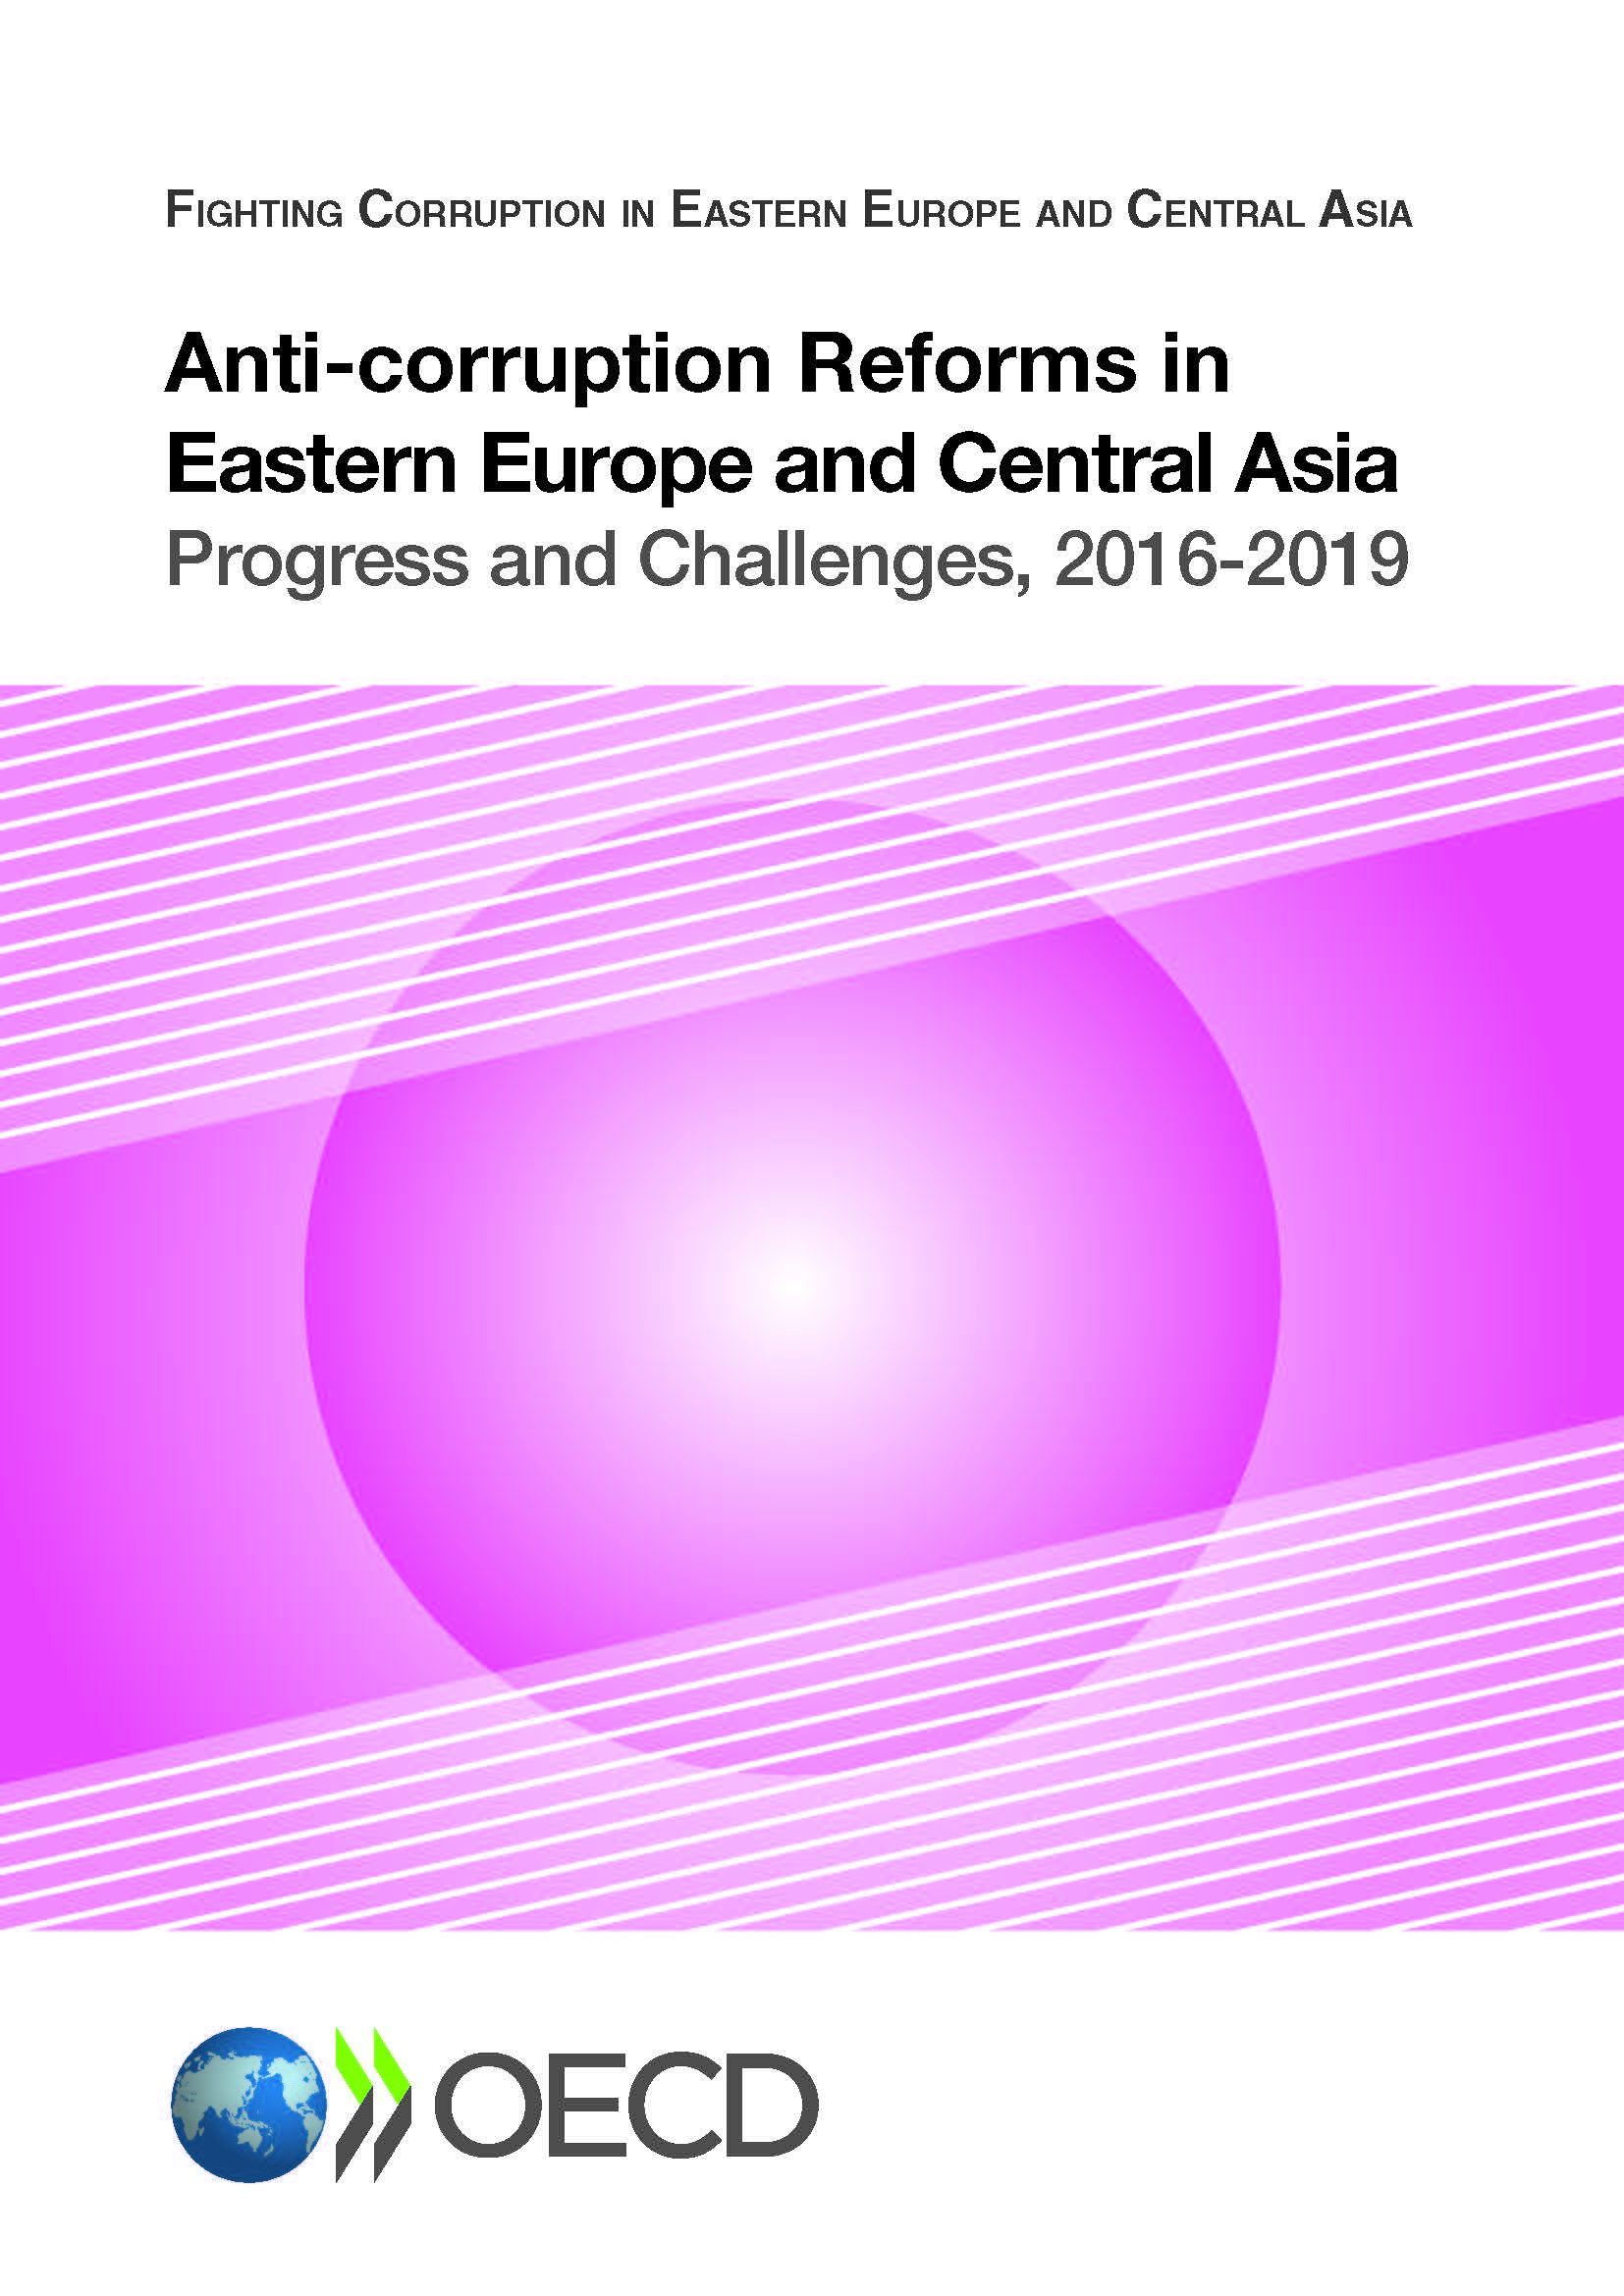 OECD (2020). Anti-corruption Reforms in Eastern Europe and Central Asia: Progress and Challenges, 2016-2019.